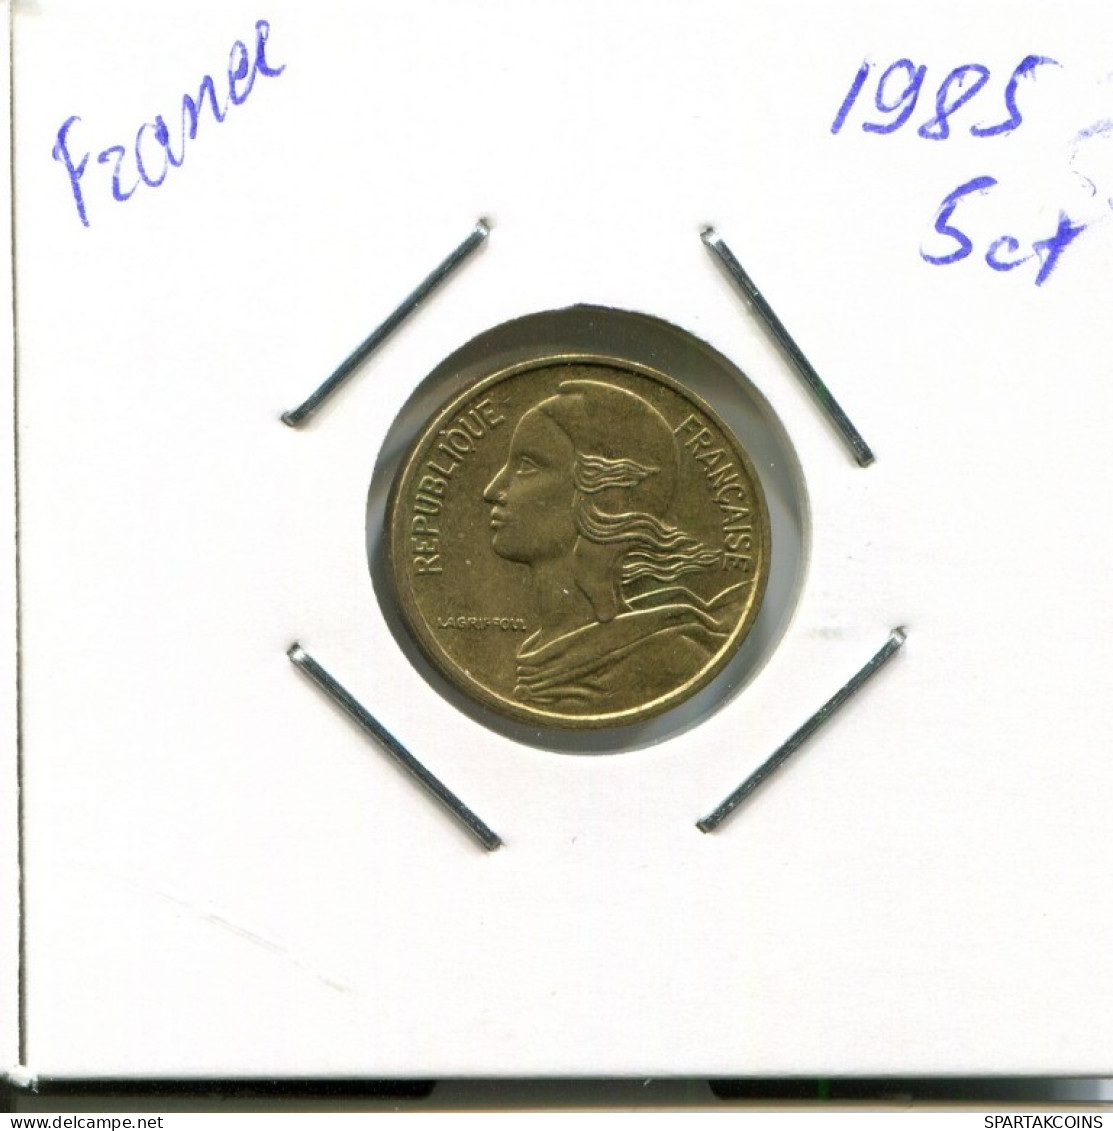 5 CENTIMES 1985 FRANCE Coin French Coin #AN818.U.A - 5 Centimes